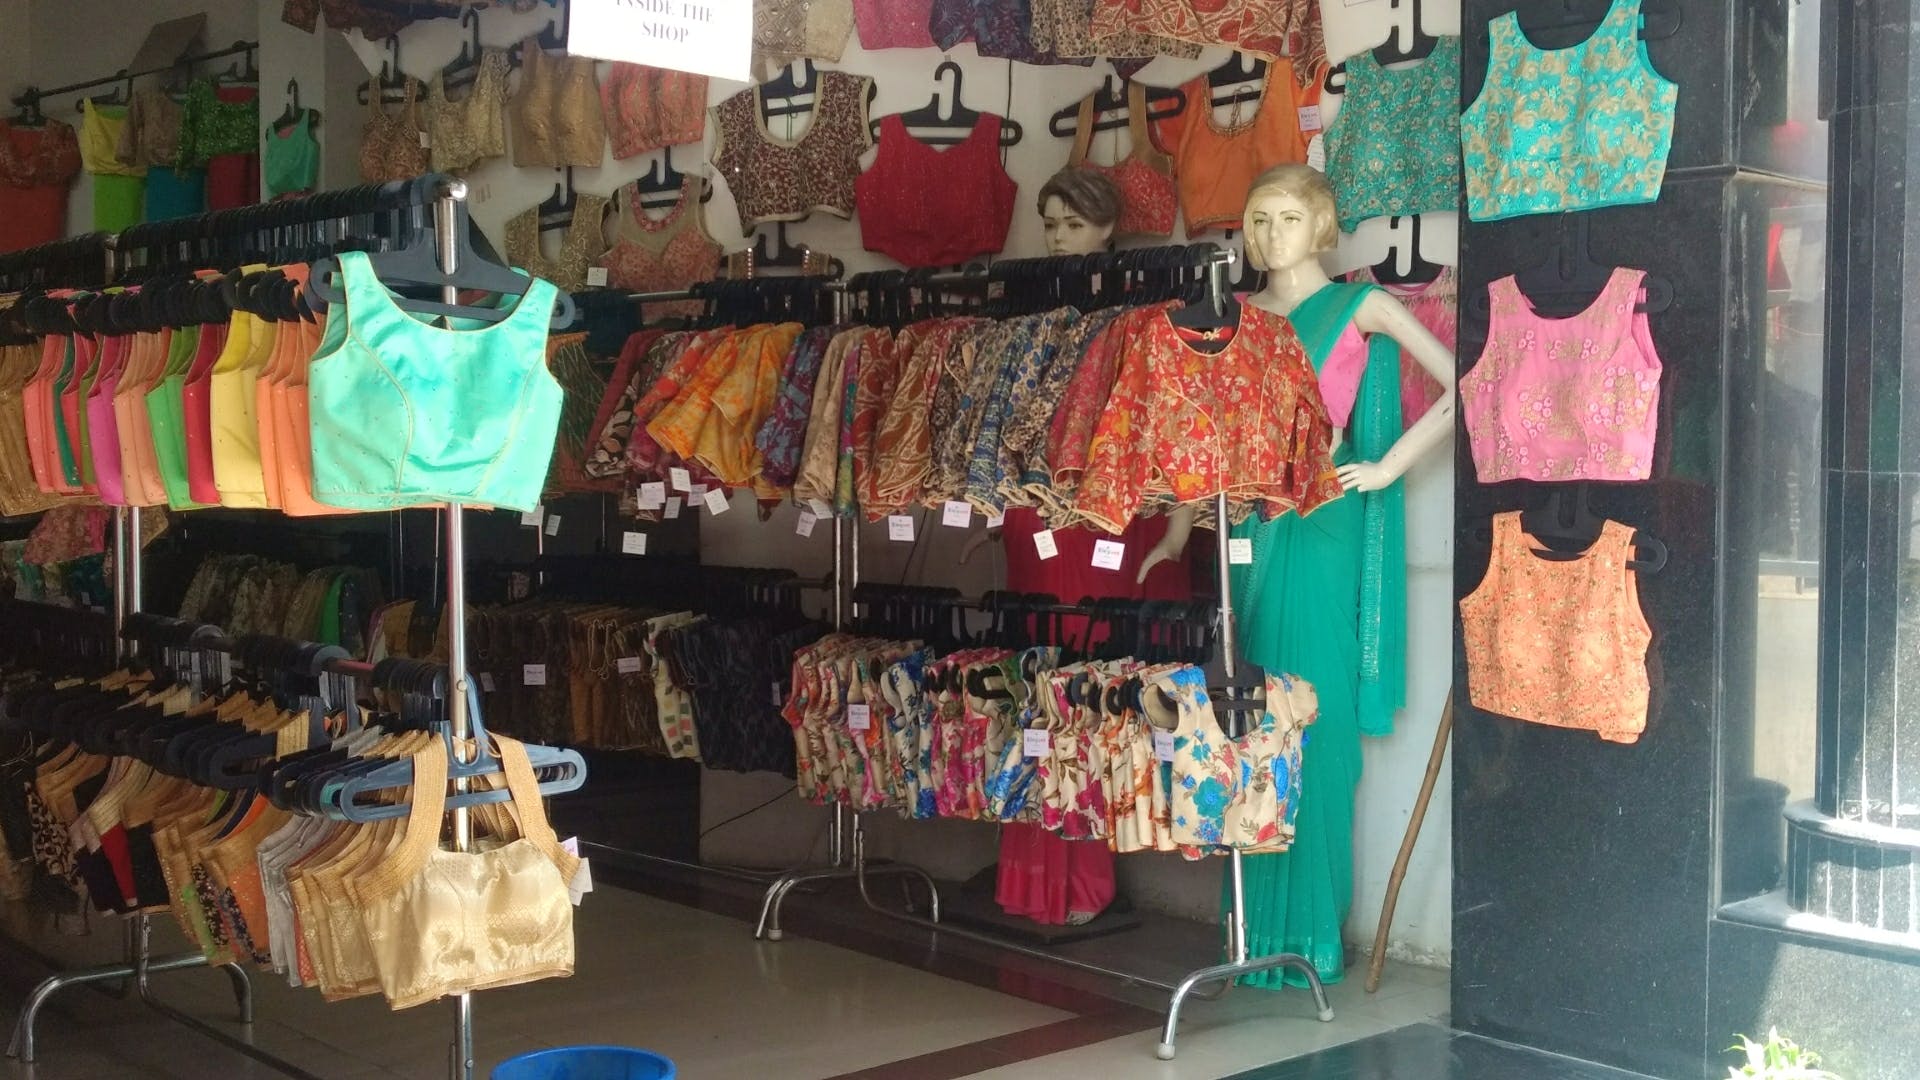 Boutique,Retail,Outlet store,Selling,Textile,Building,Bazaar,Shopping,Room,Marketplace